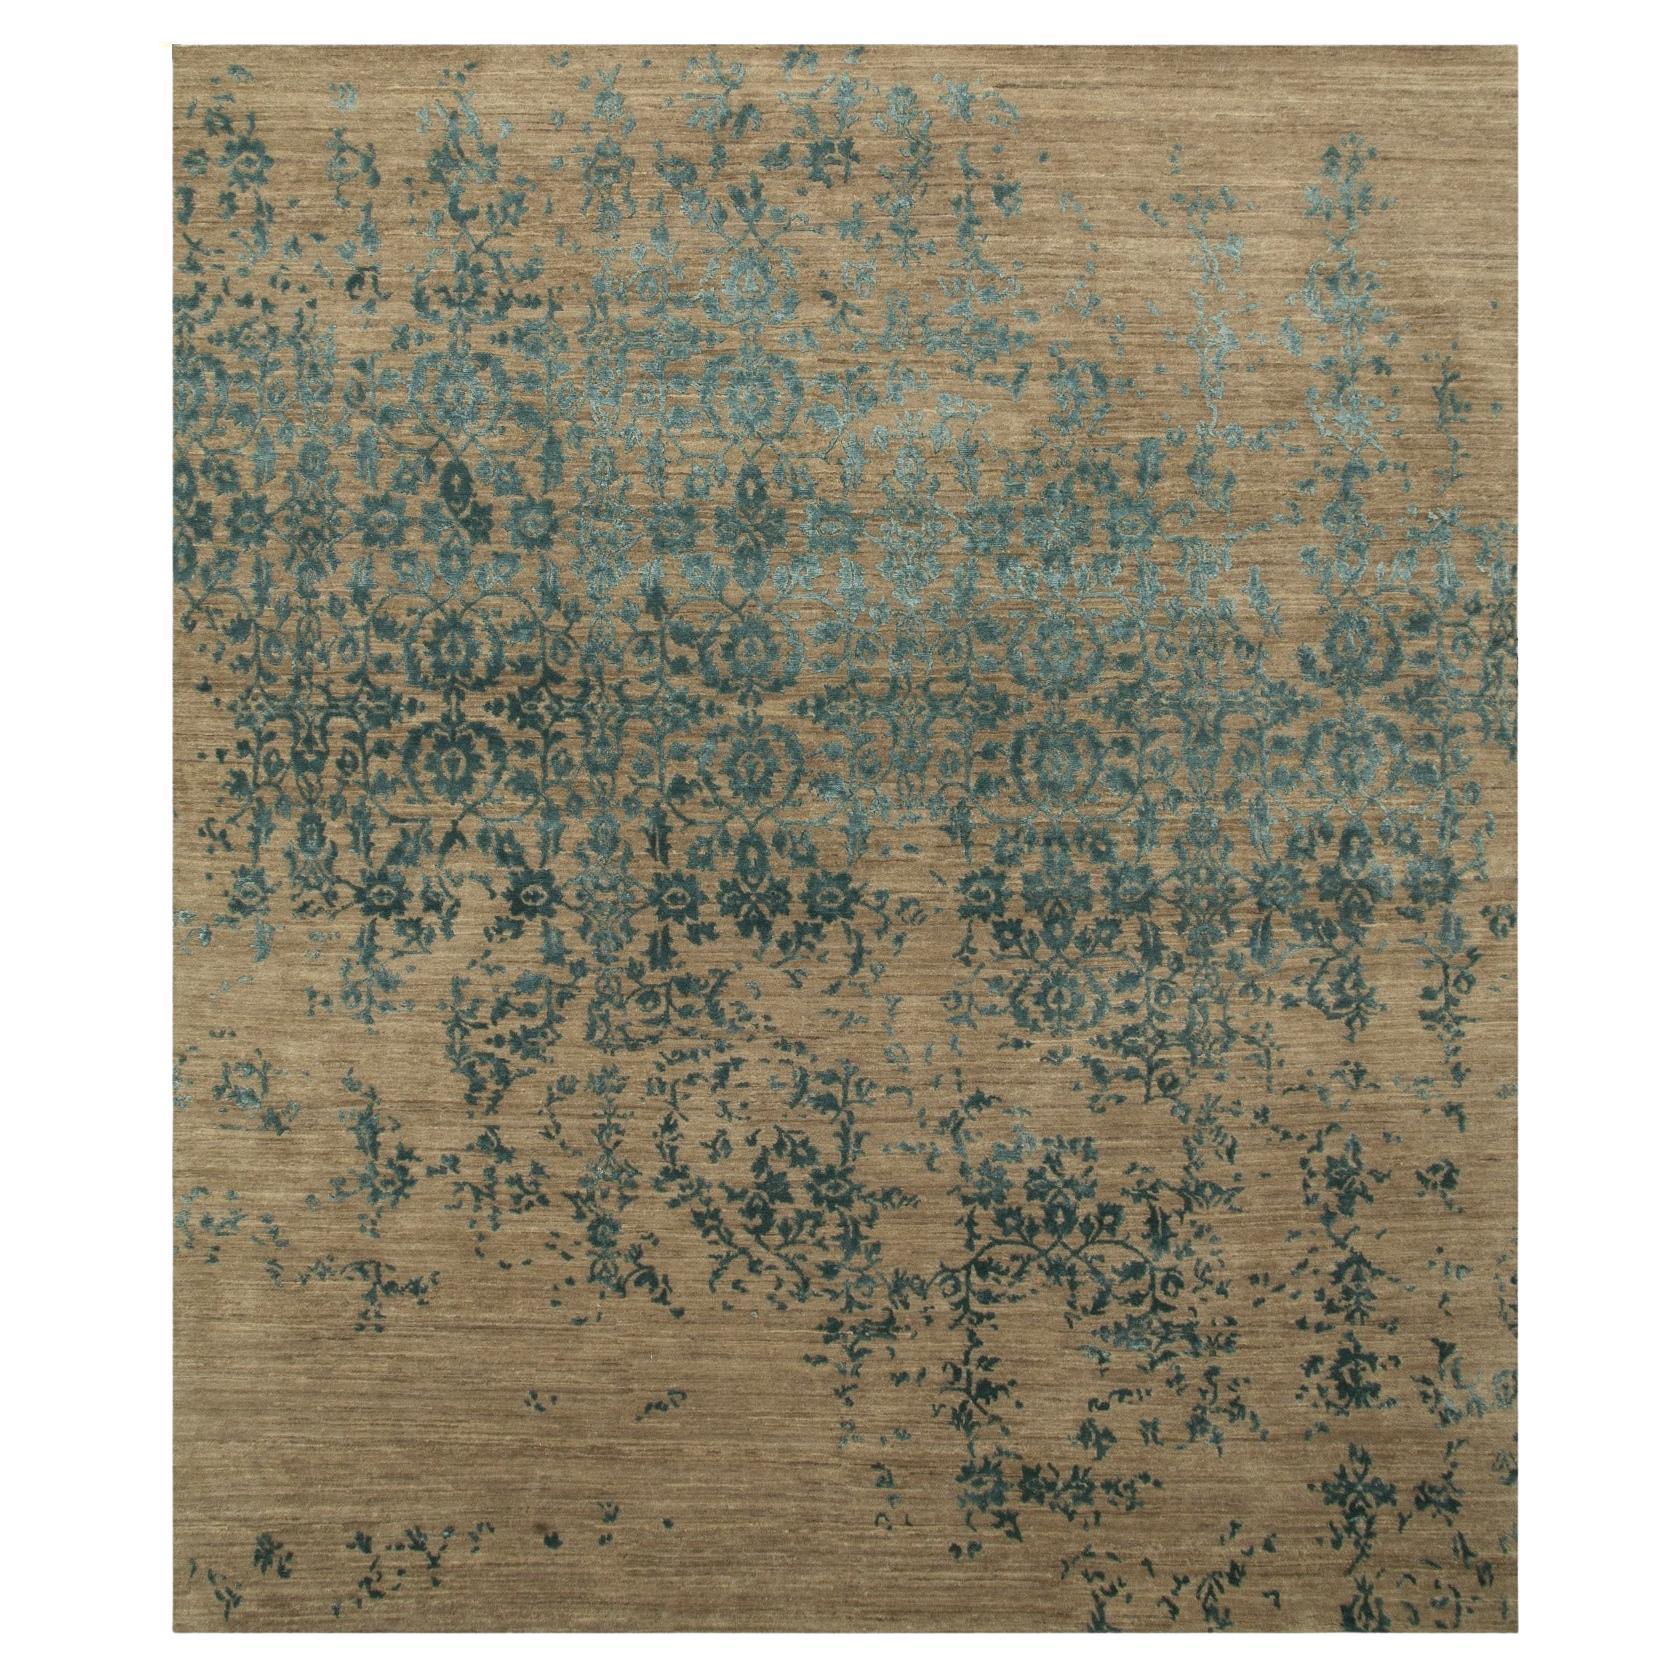 Tabriz Erased Modern Design Persian Rug Hand Knotted Wool and Silk Tan Blue For Sale